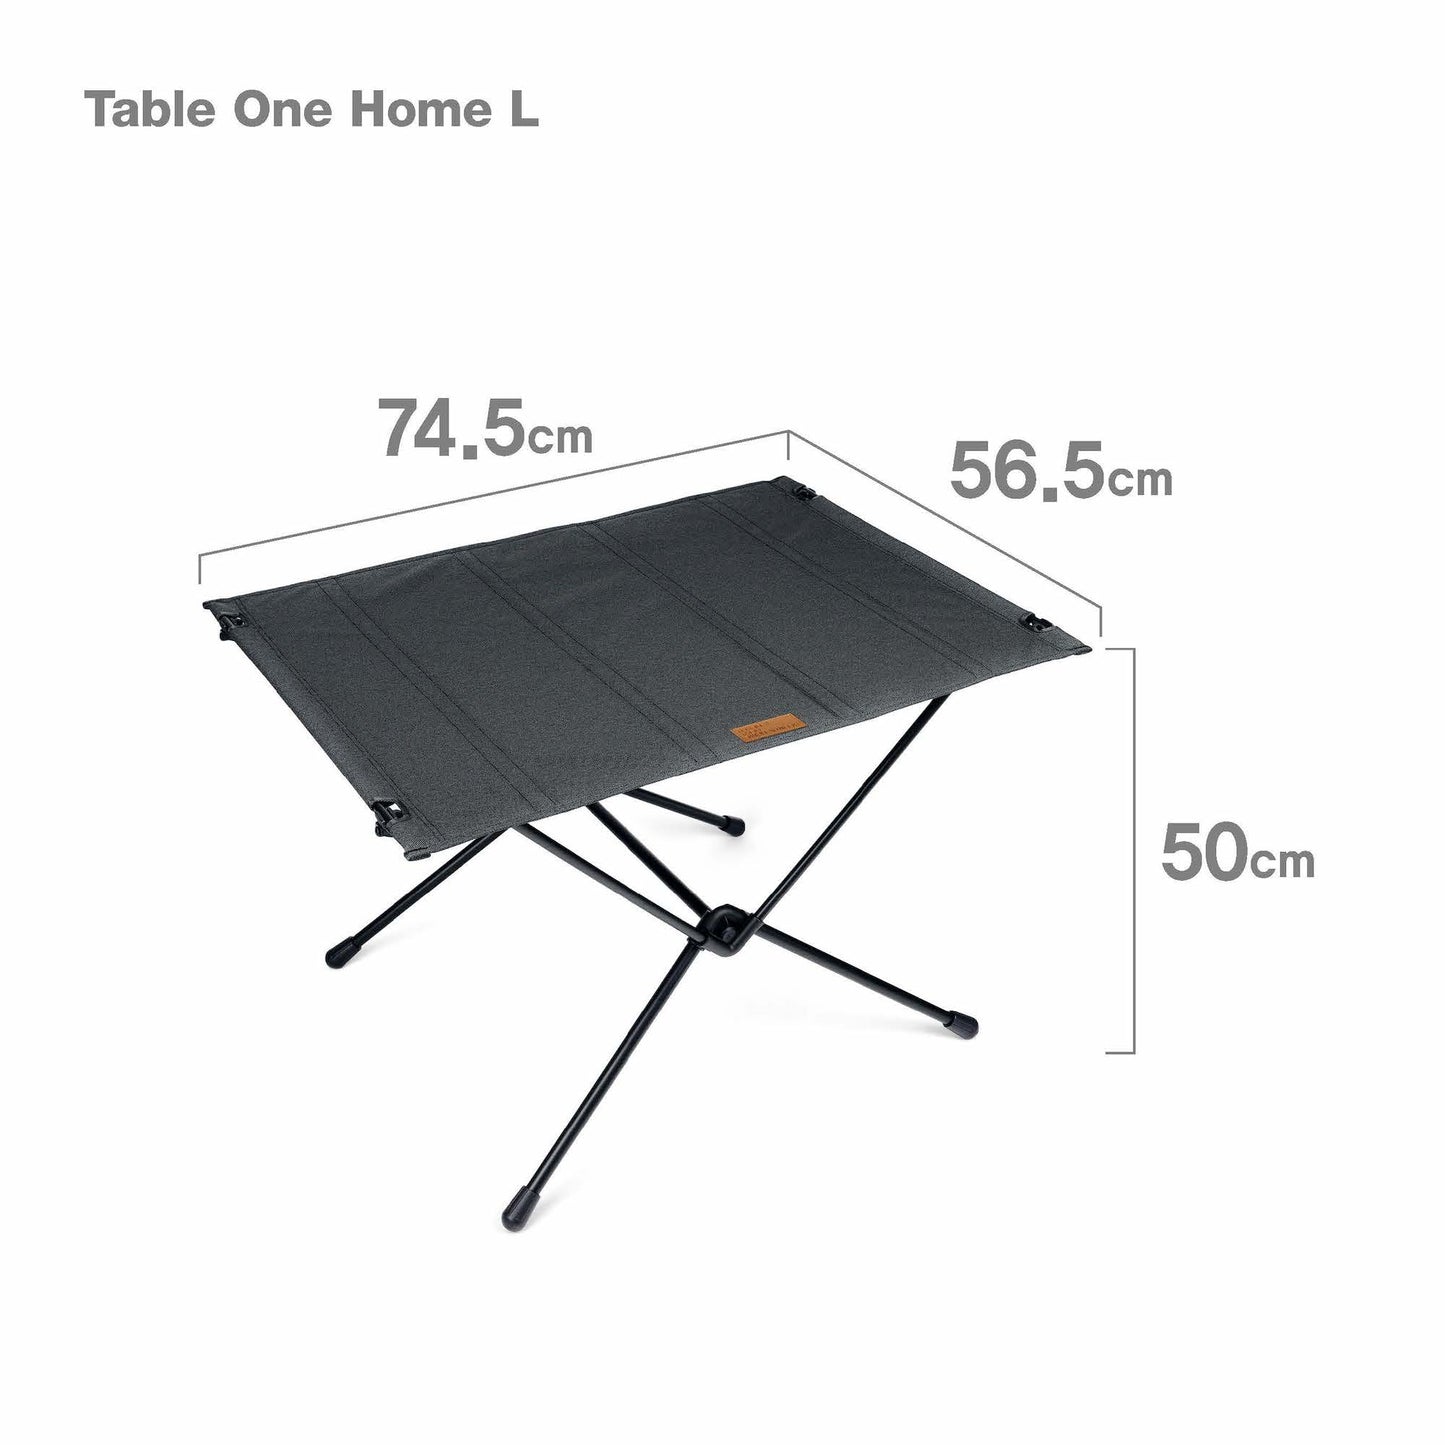 Table One Home L - Black